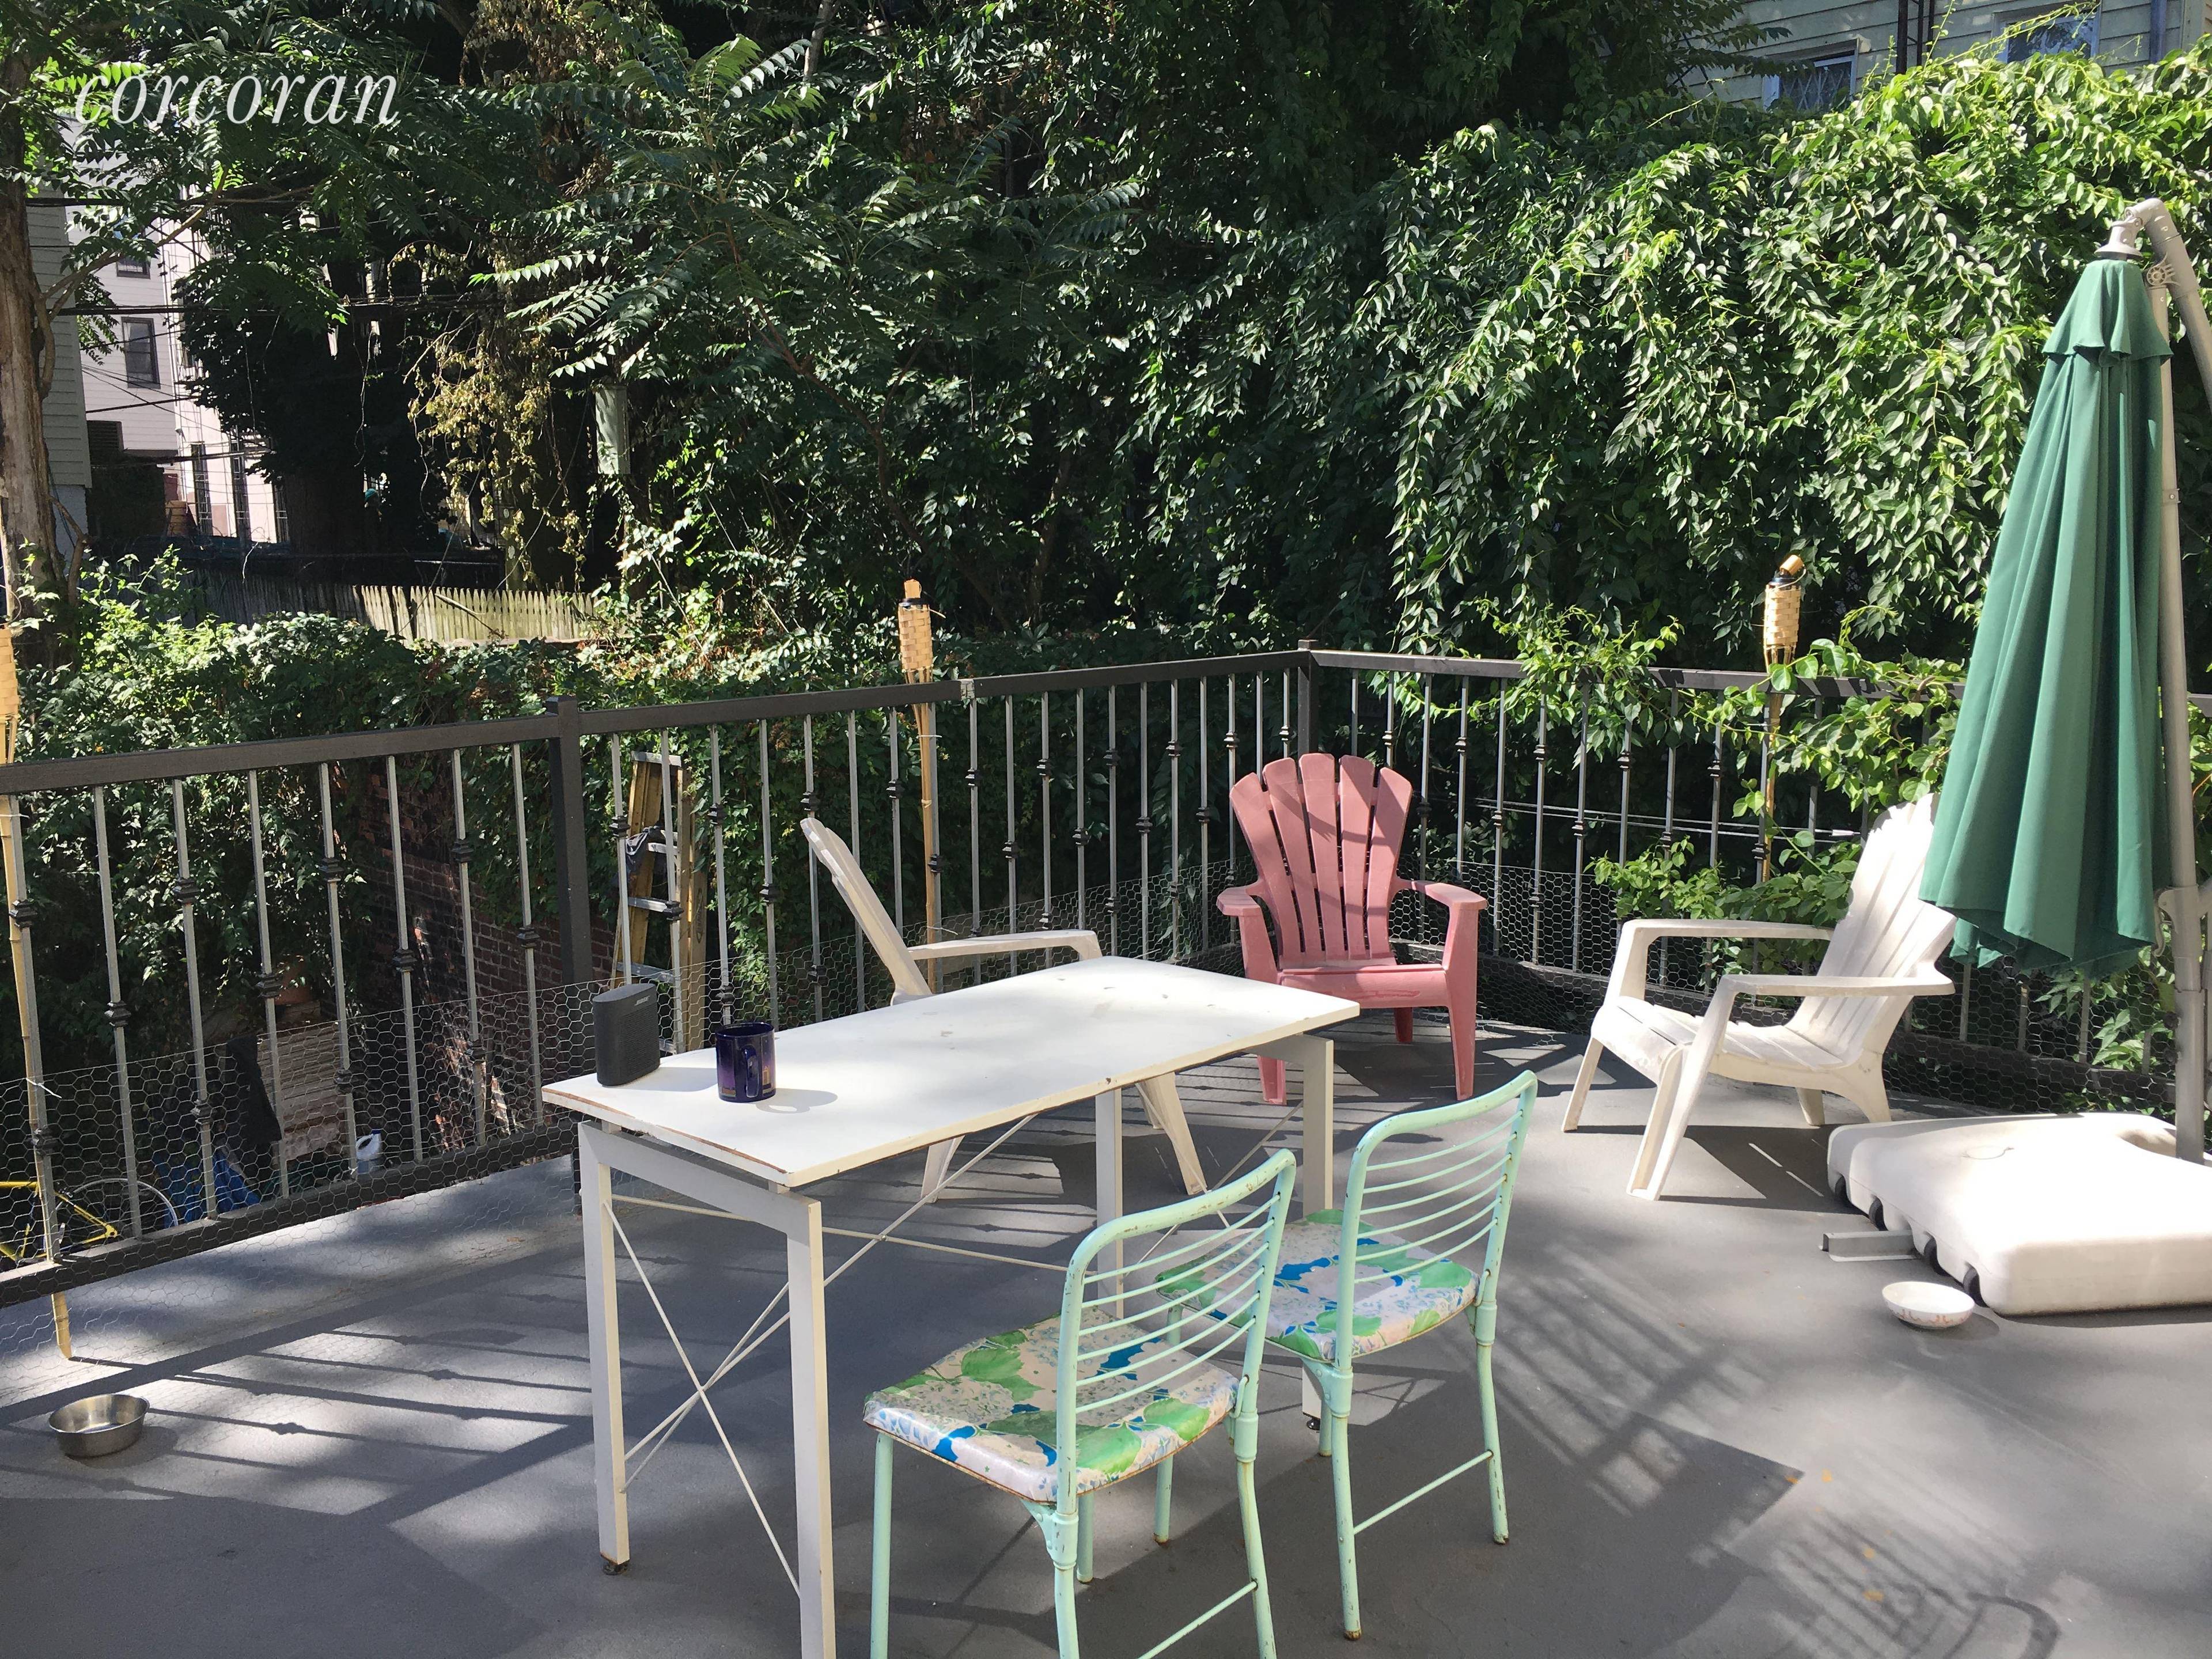 No Fee Bushwick two bedroom, 1 bath apartment with high ceilings, hardwood floors and back deck just in time for the summer.